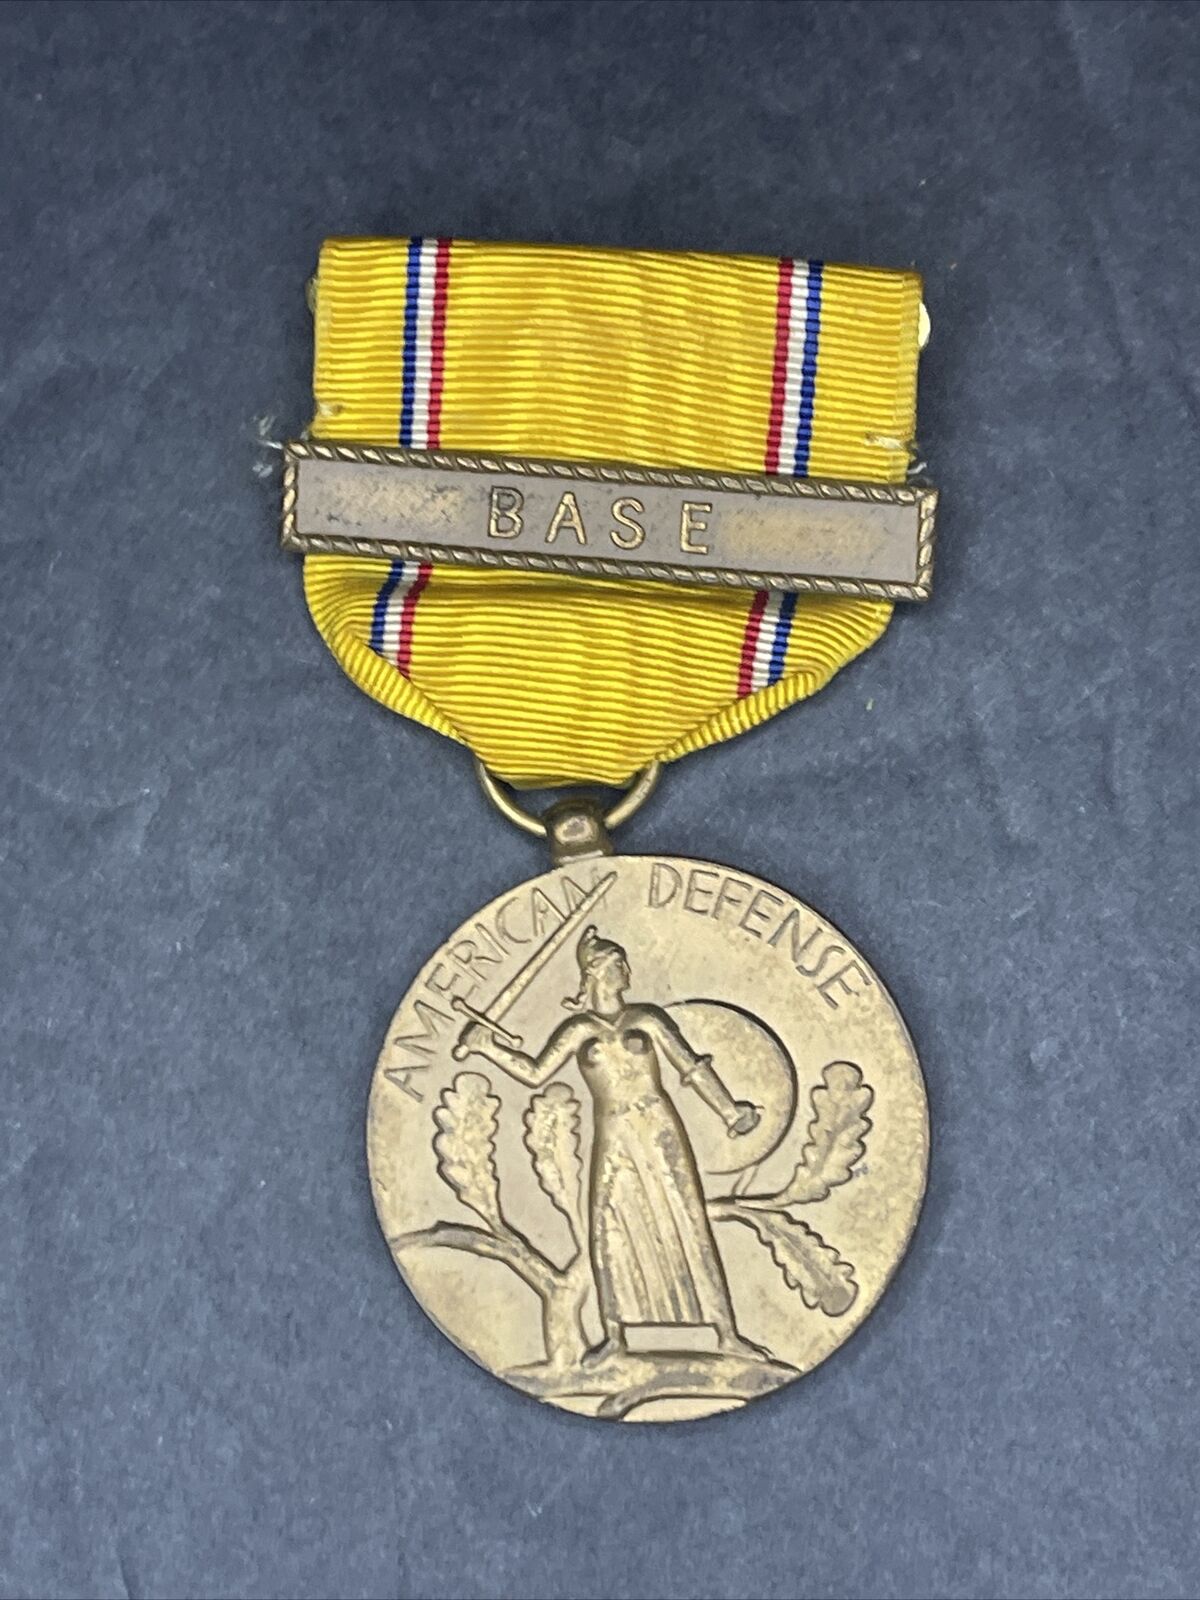 WWII American Defense medal with \'BASE\' clasp.